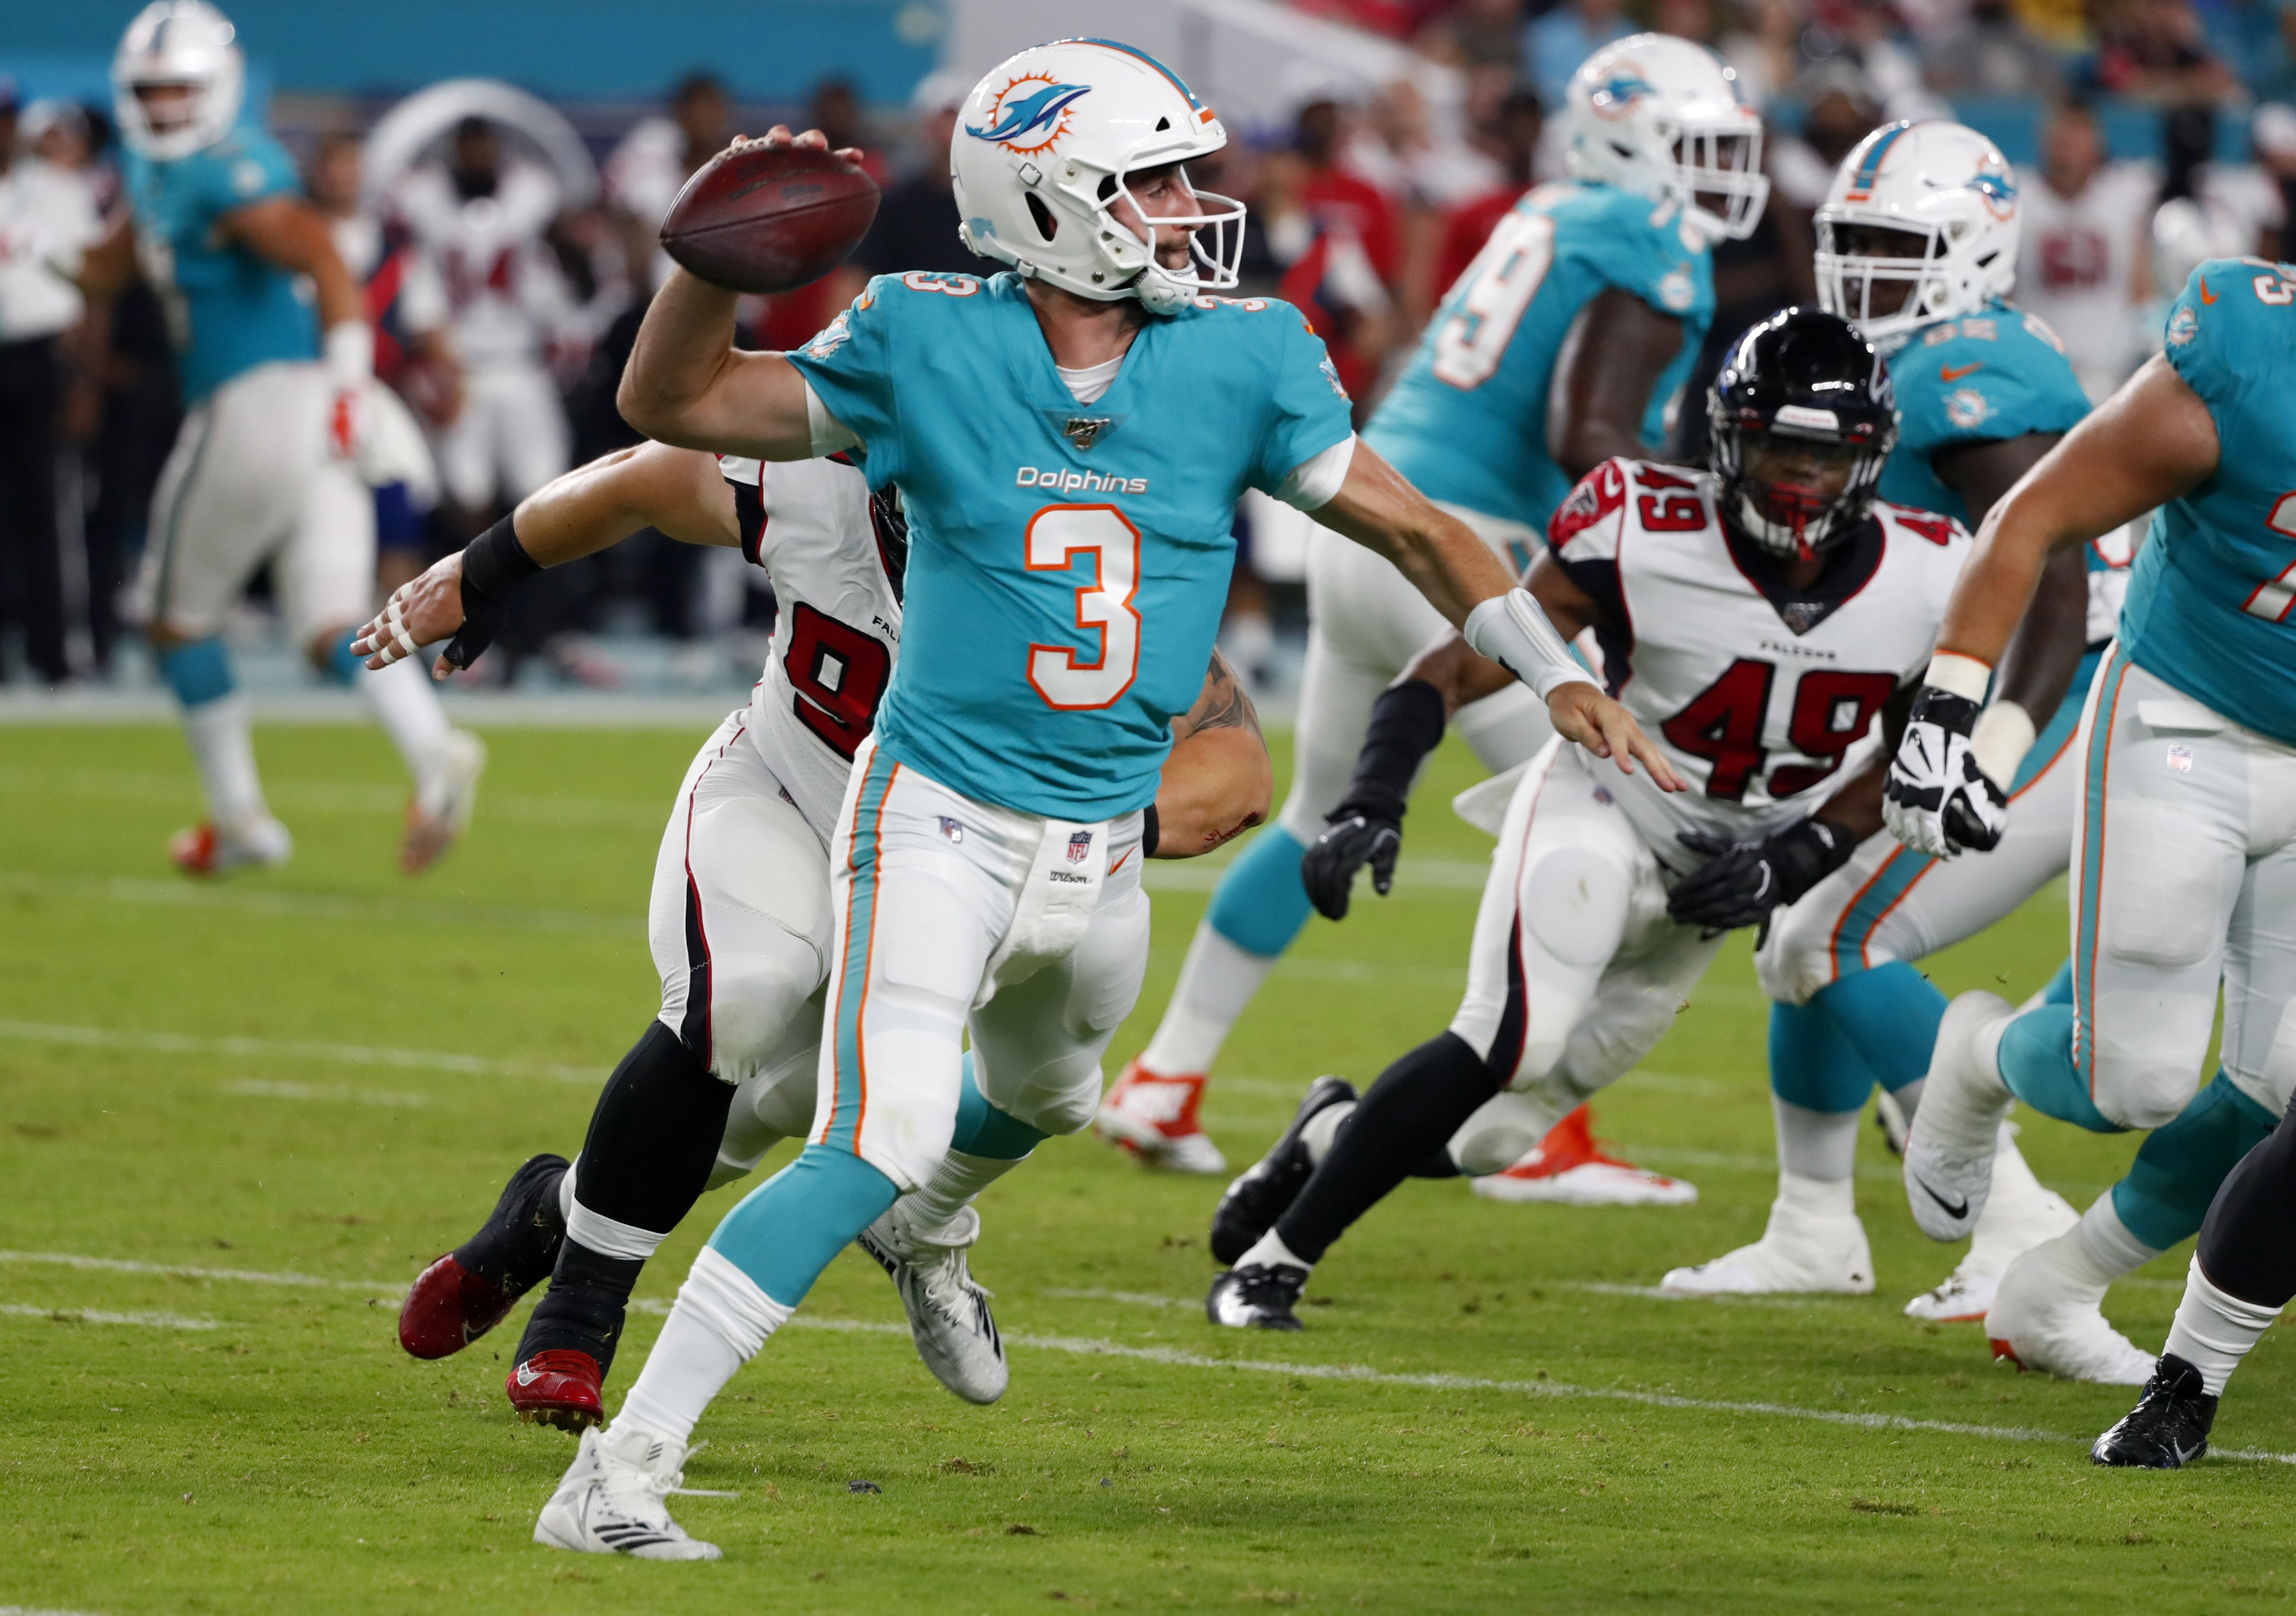 Miami Dolphins vs Tampa Bay Buccaneers Preview: What To Watch For